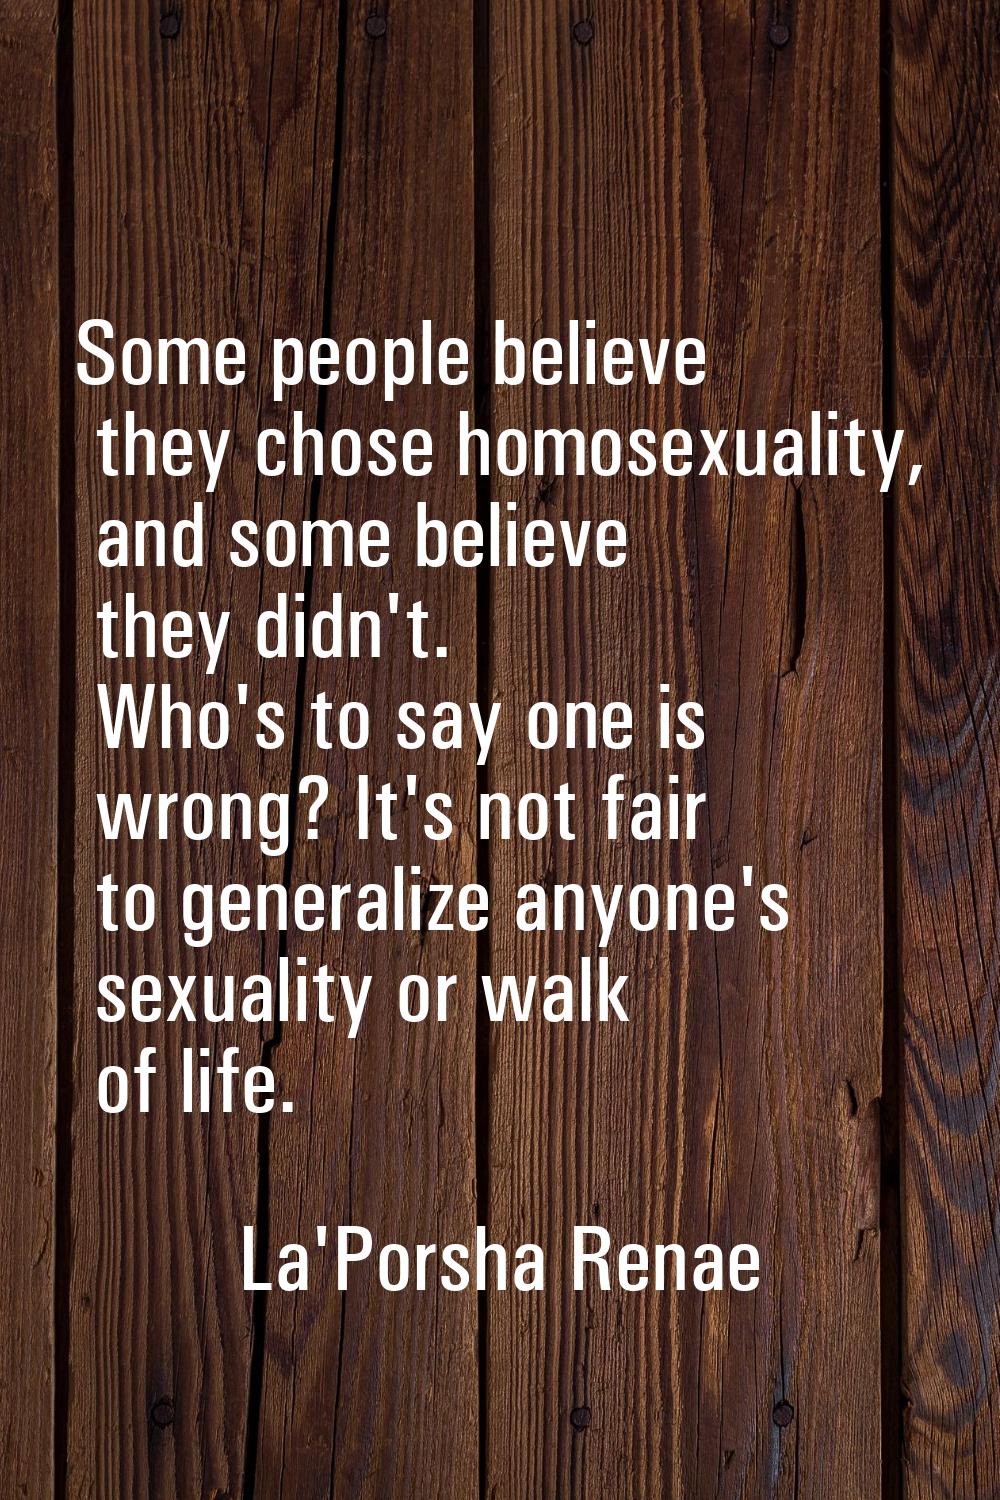 Some people believe they chose homosexuality, and some believe they didn't. Who's to say one is wro